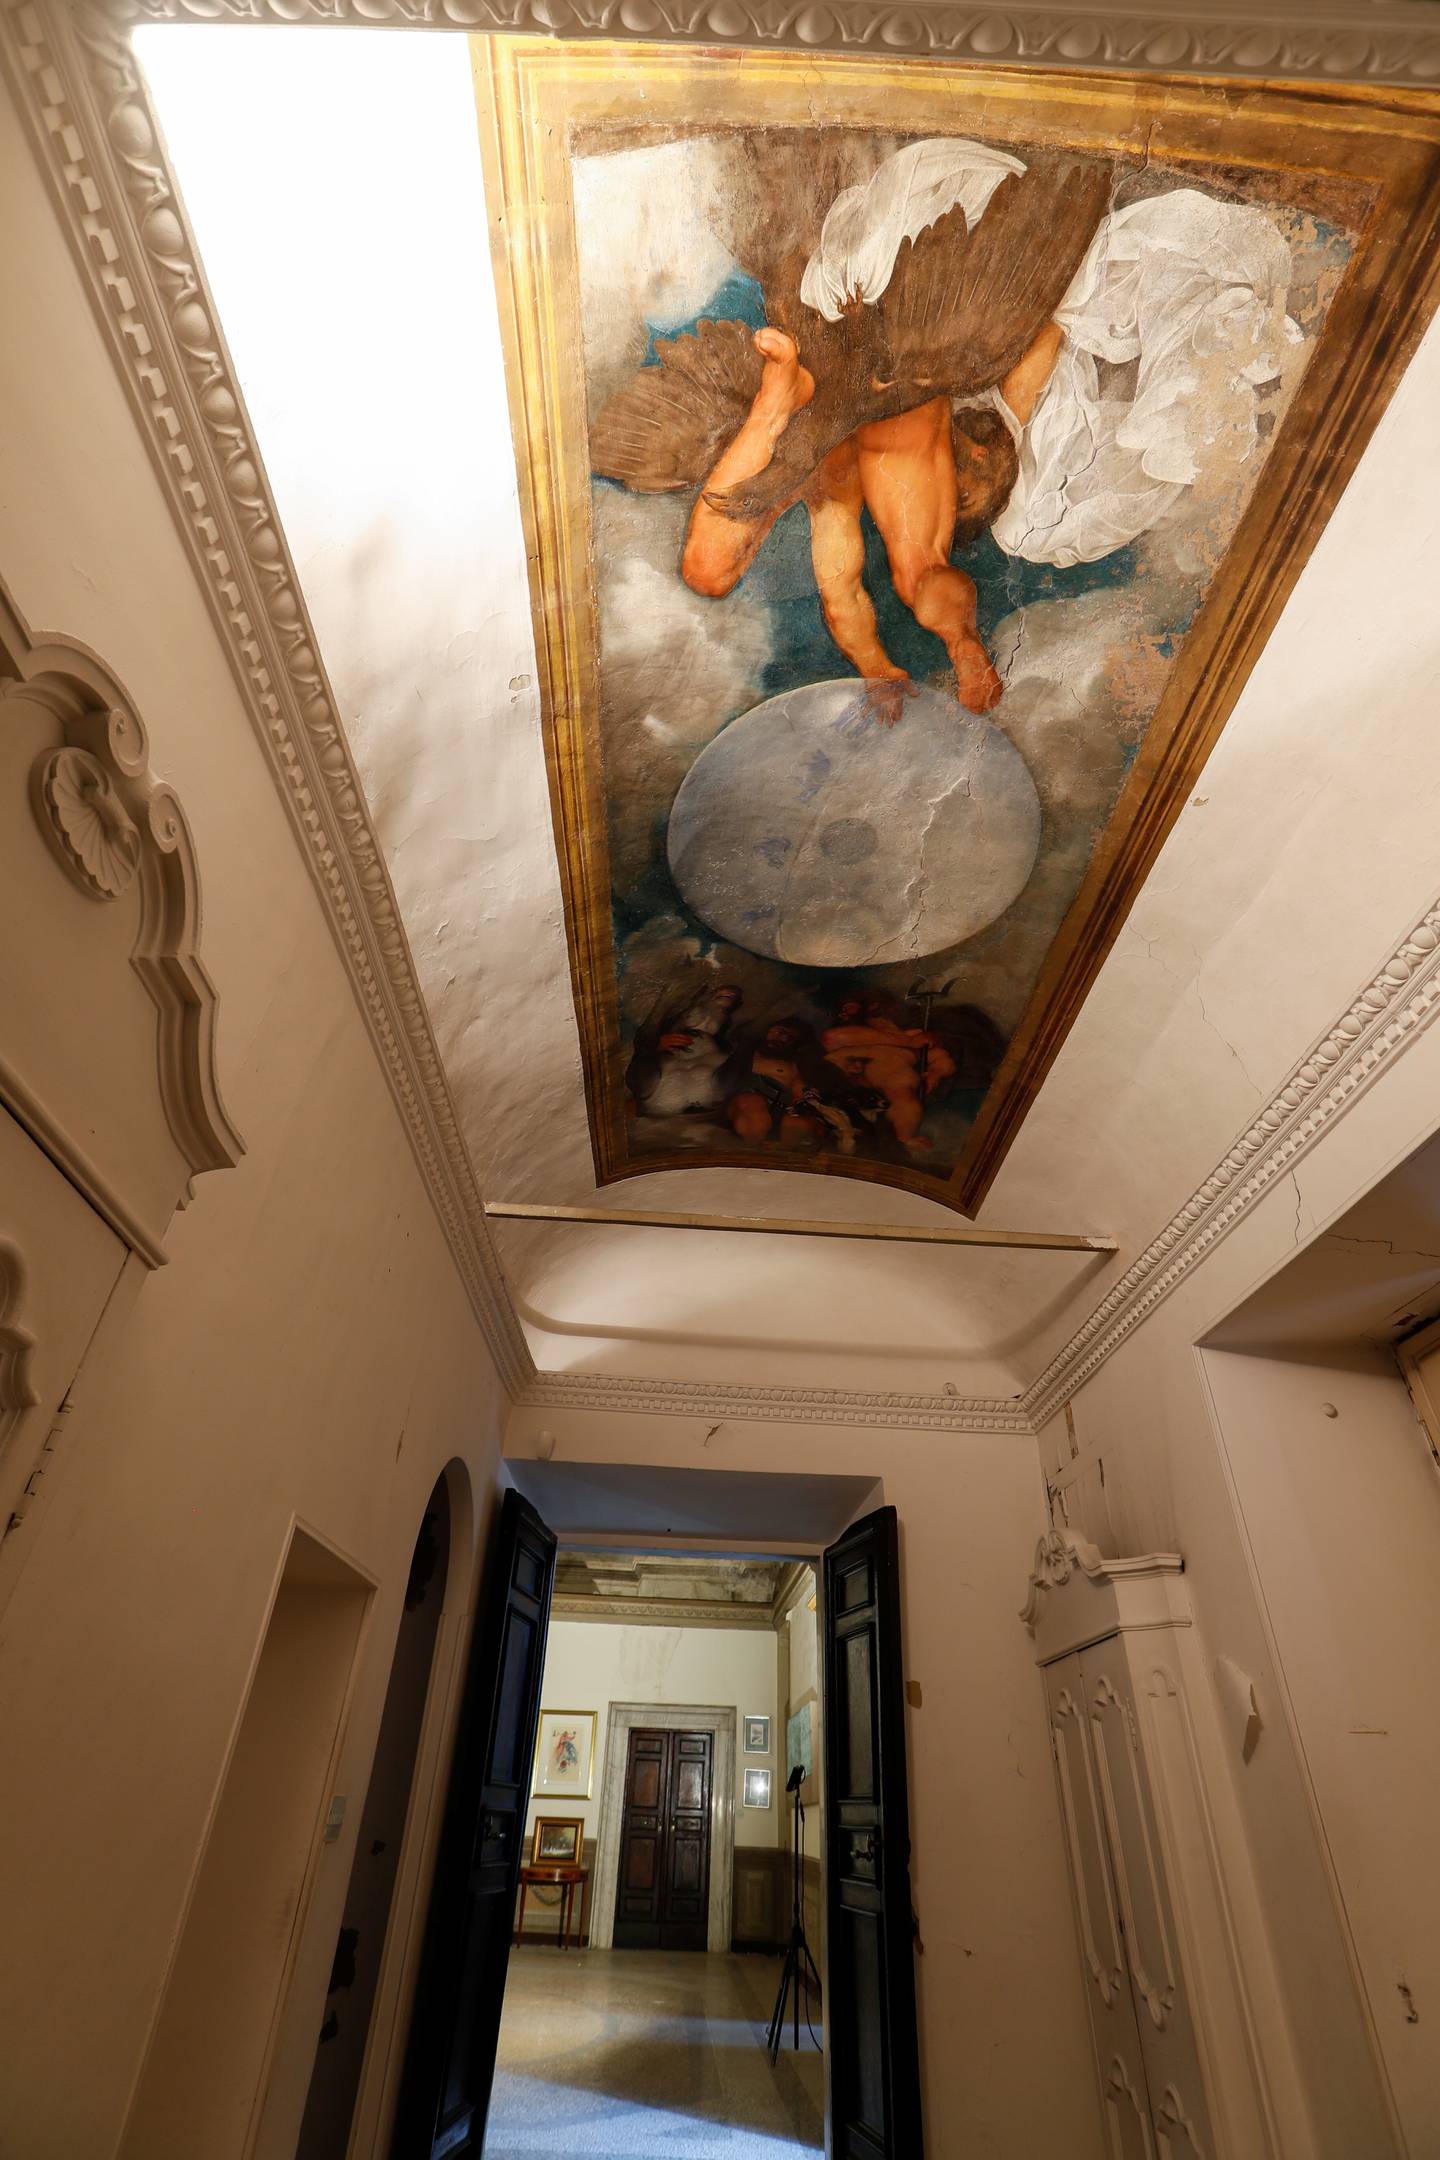 'Jupiter, Neptune and Pluto', the only ceiling mural ever painted by Caravaggio. Its value comprises a significant chunk of the property's asking price. Reuters/Remo Casilli